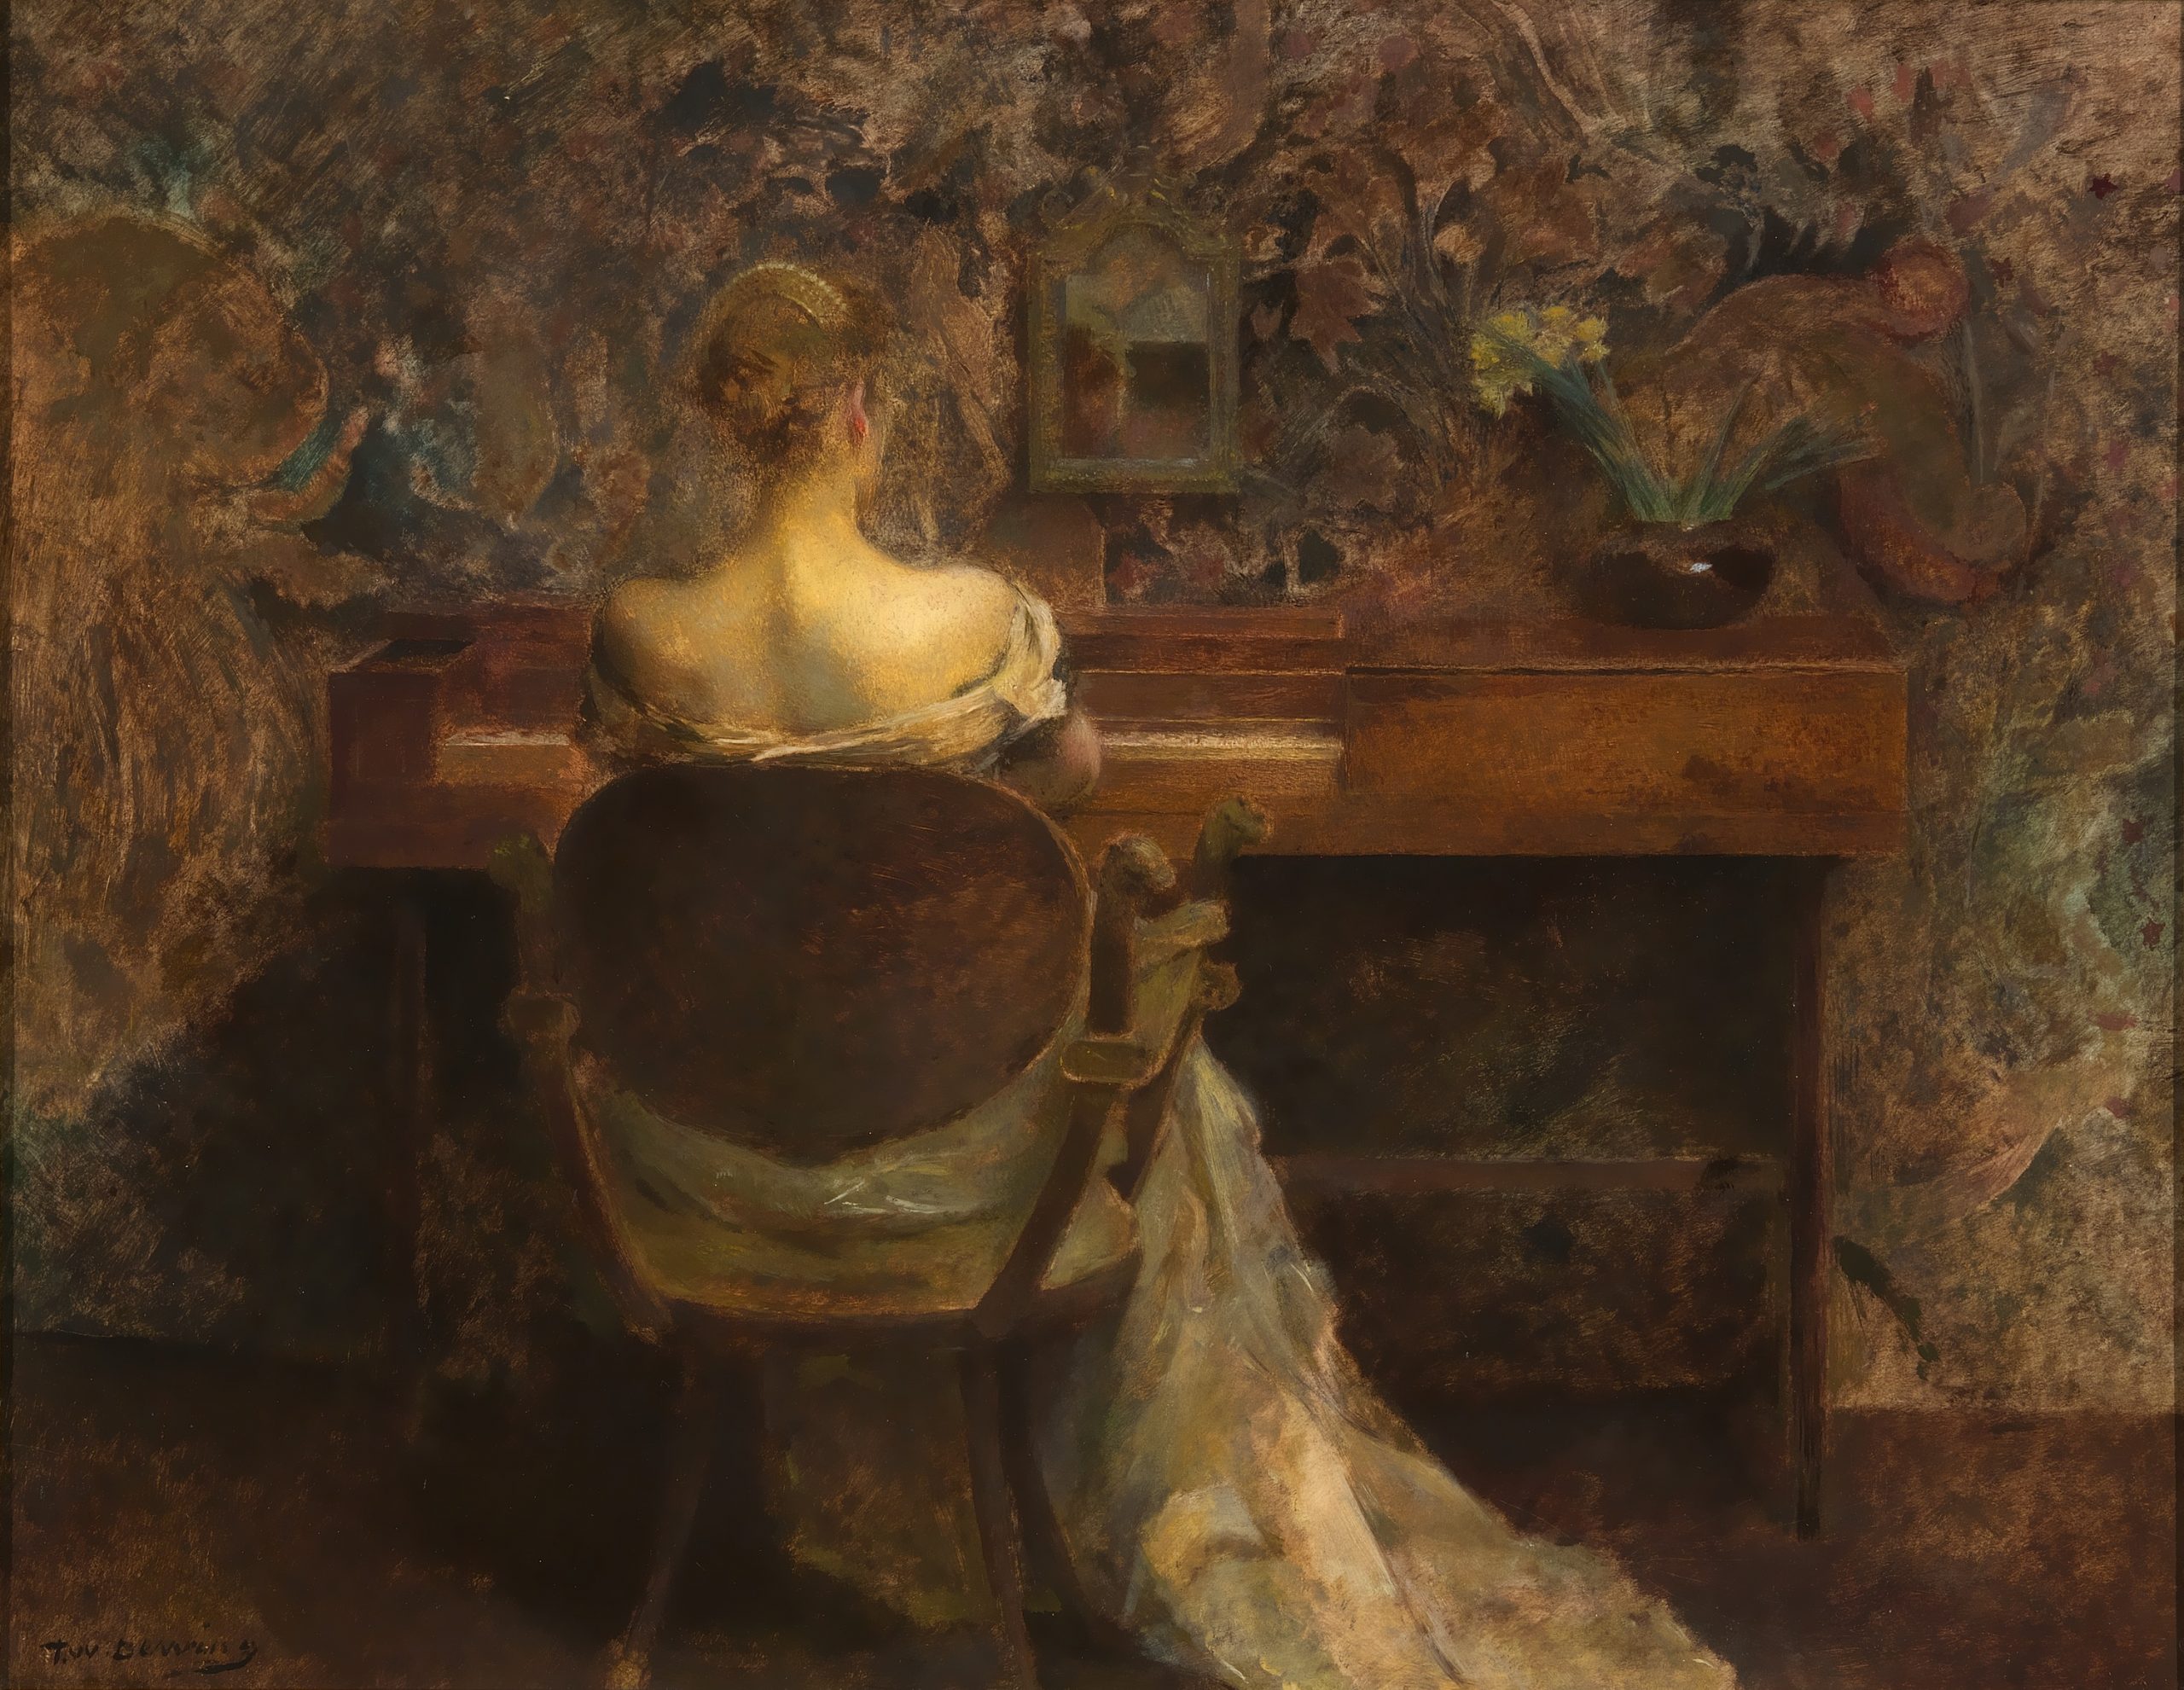 "The Spinet," by Thomas Wilmer Dewing.